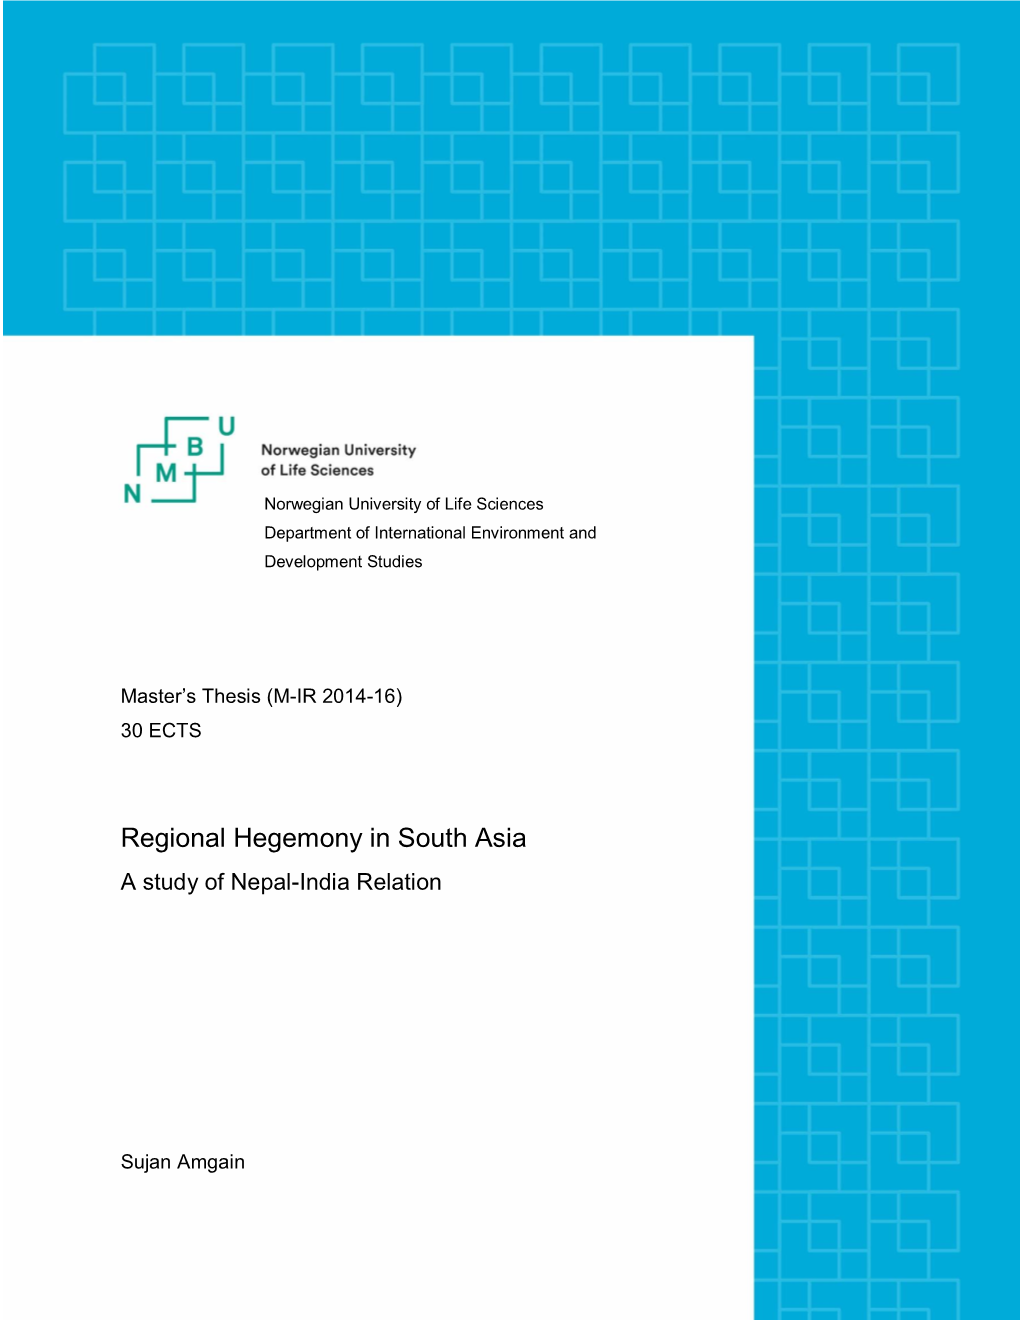 Regional Hegemony in South Asia a Study of Nepal-India Relation